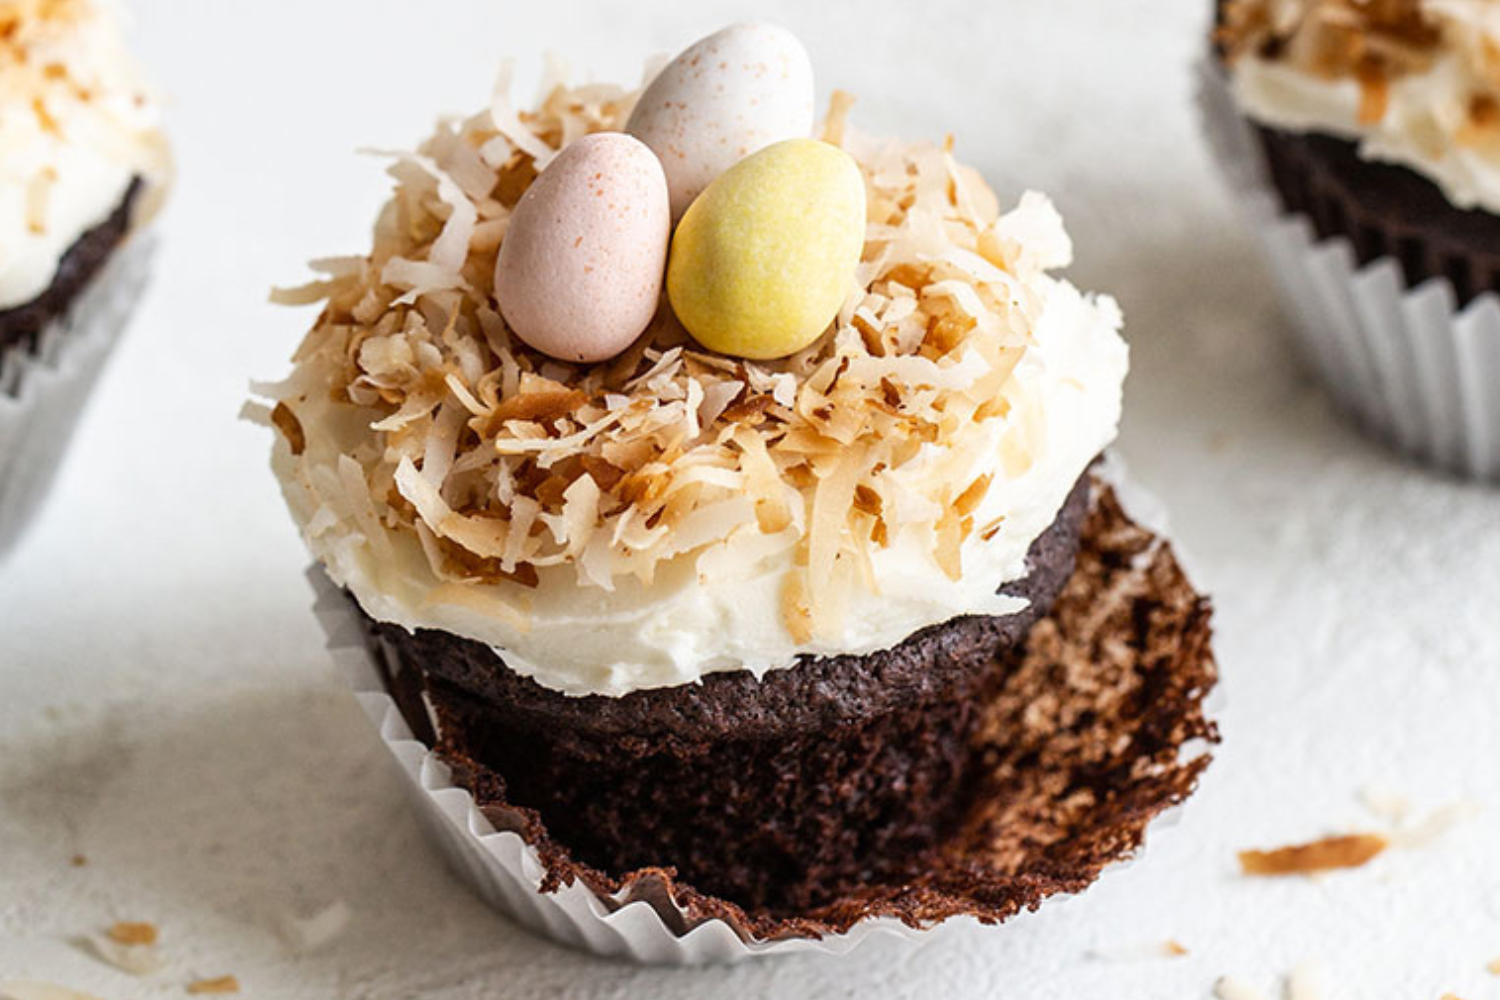 a chocolate cupcake with coconut frosting, topped with toasted coconut and chocolate eggs, with its wrapper half removed, ready to enjoy.